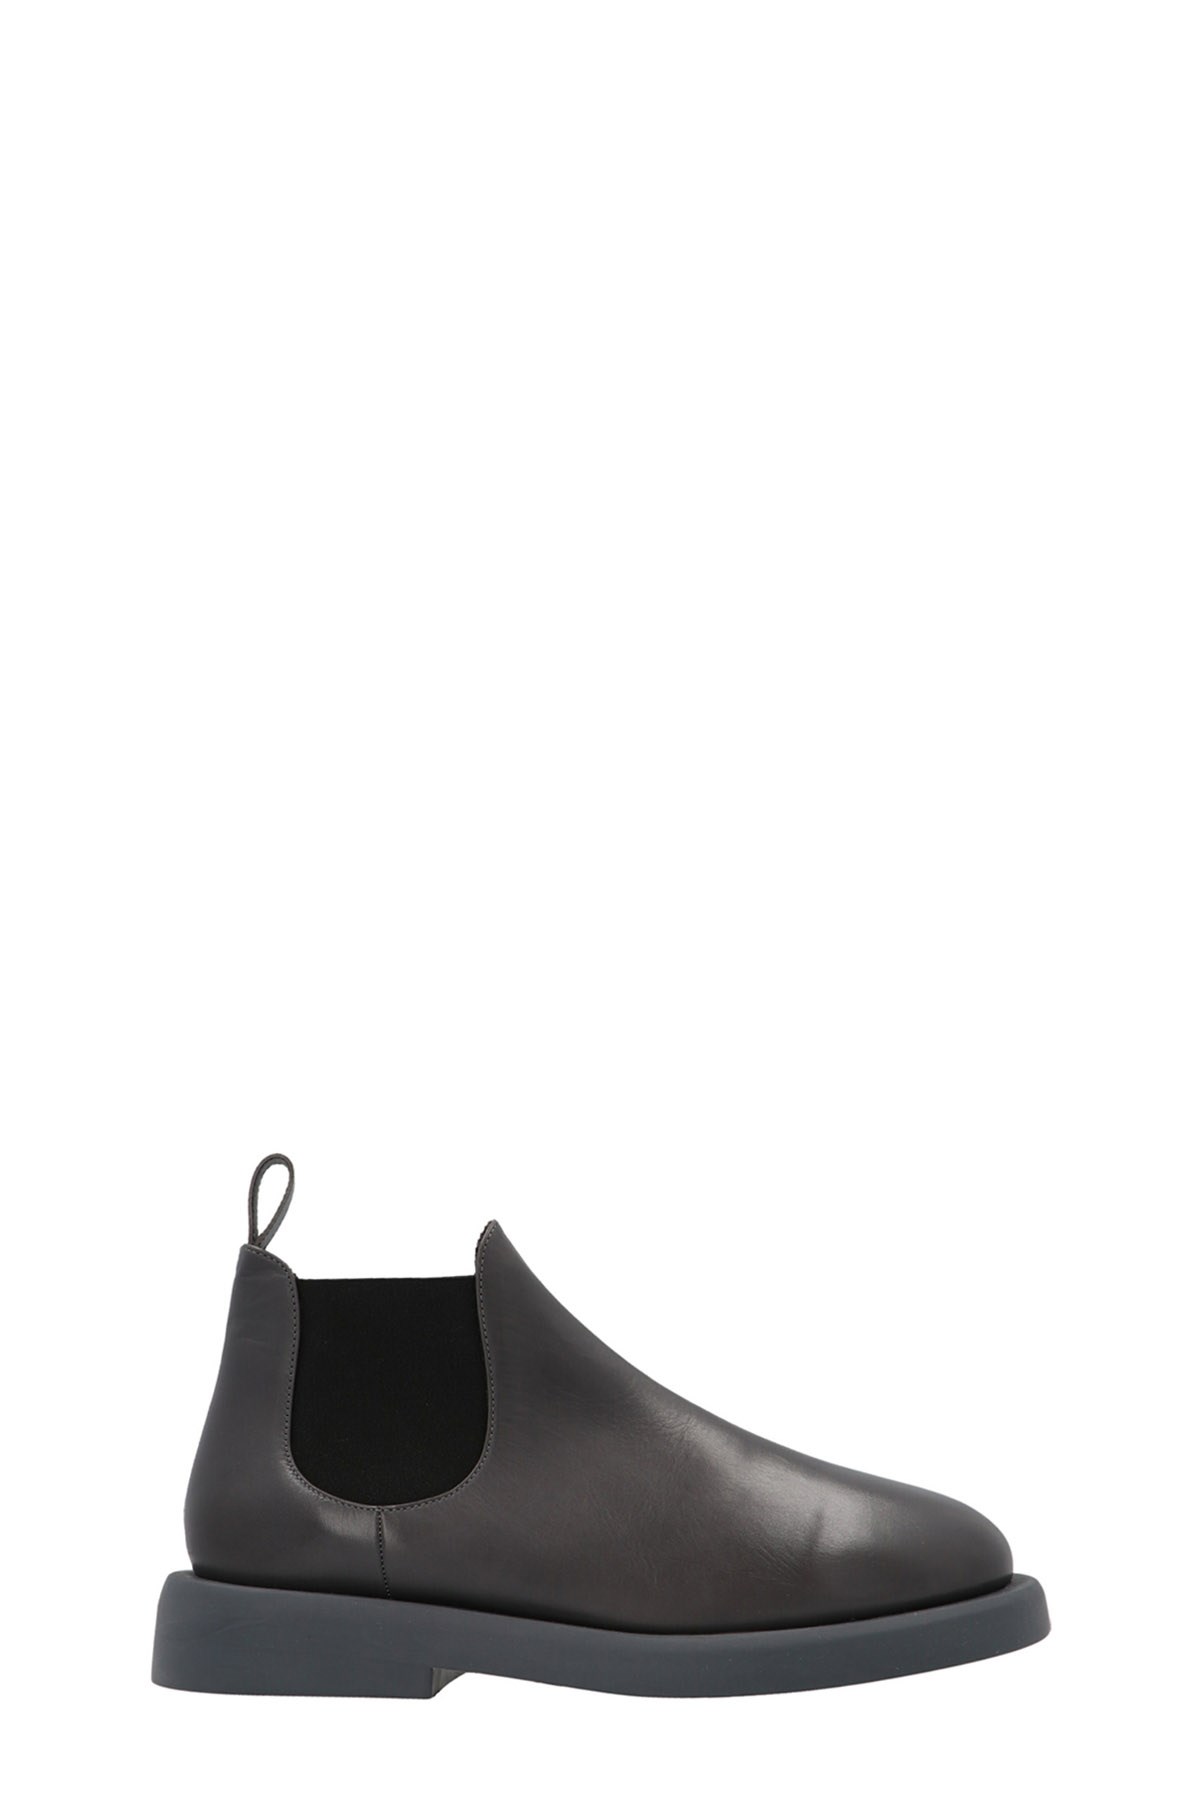 MARSÈLL ‘Gommello’ Ankle Boots